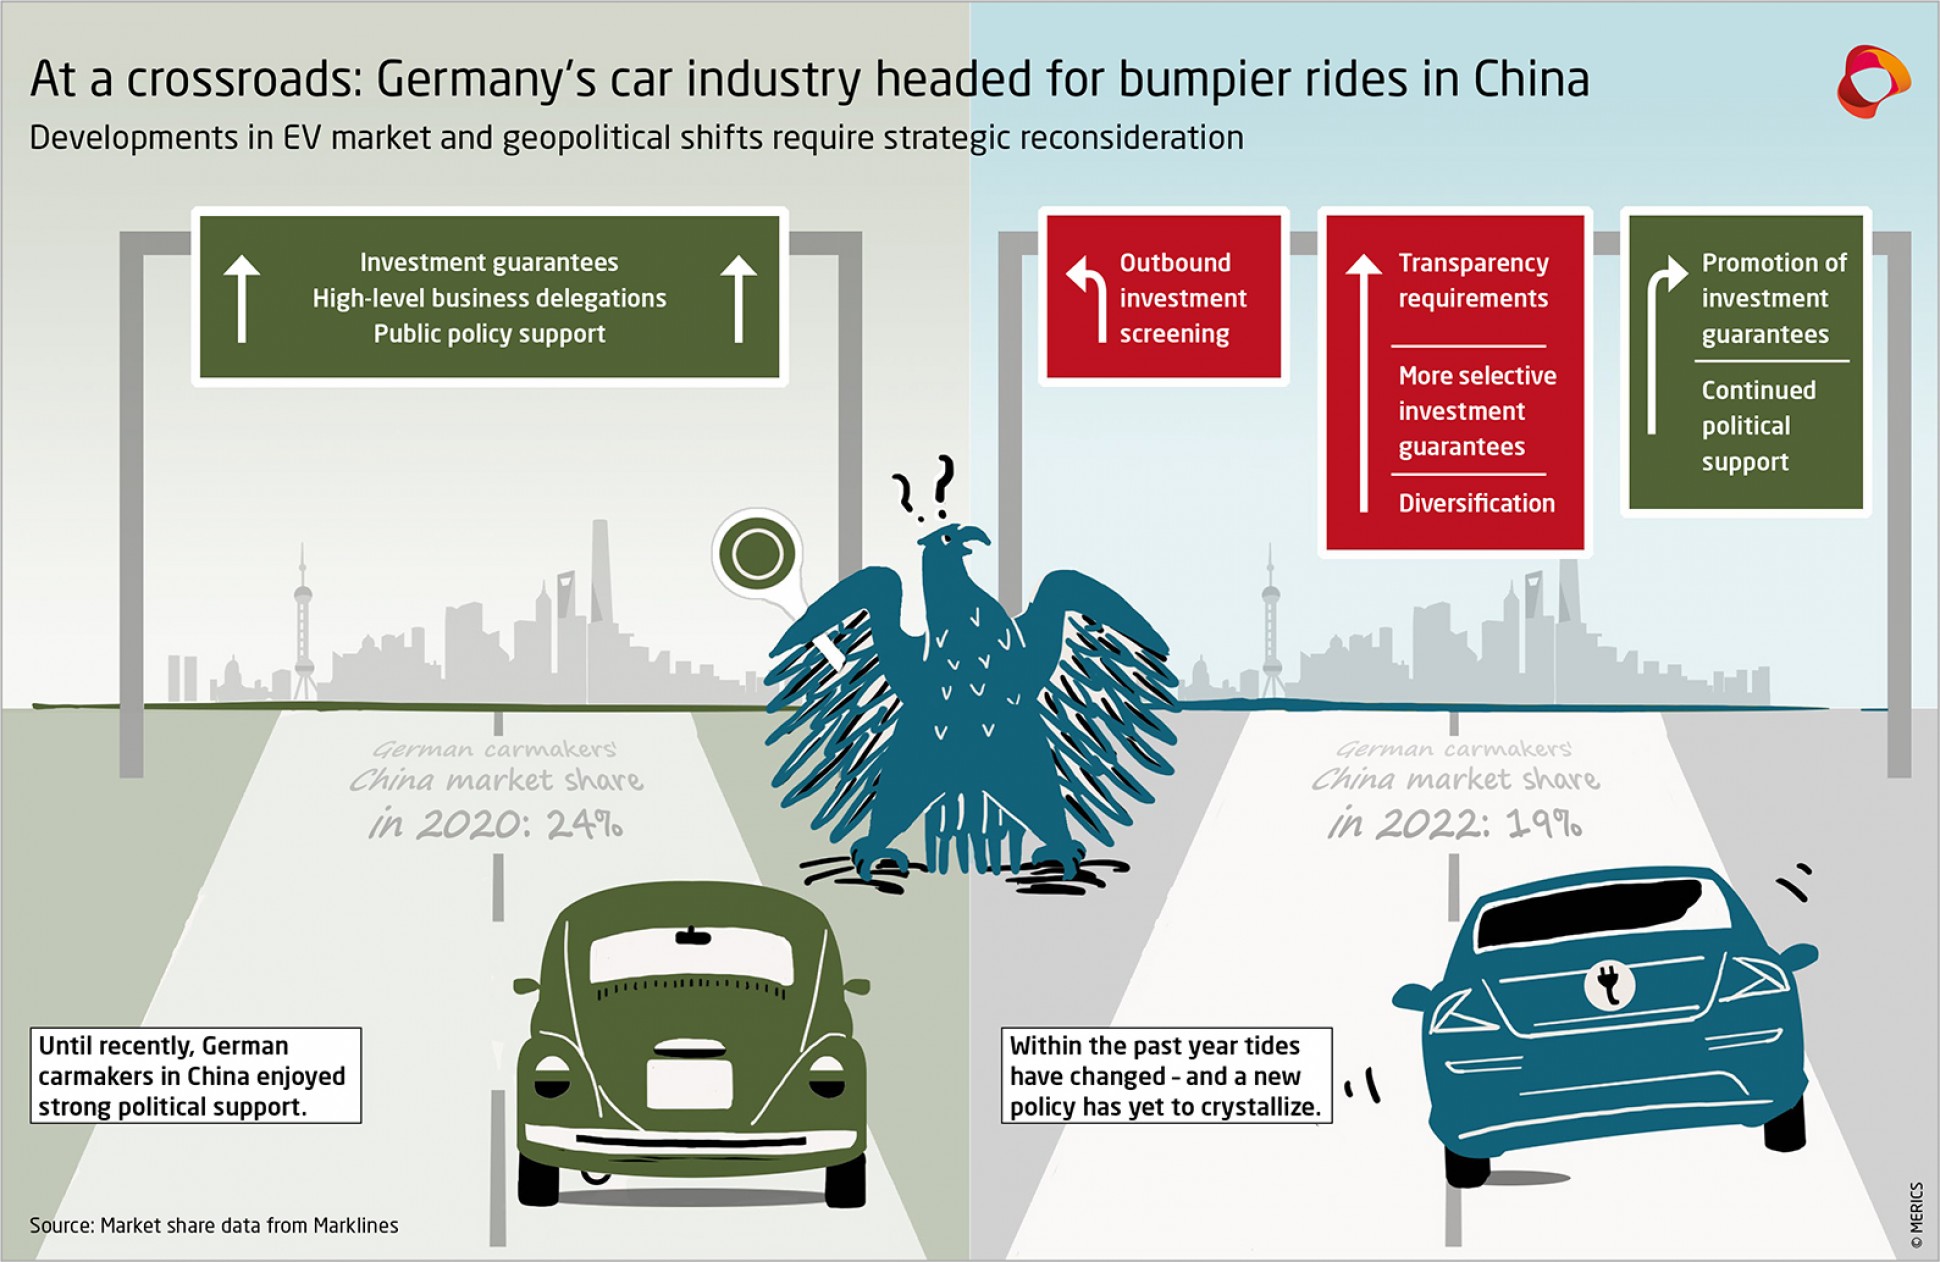 Developments in EV market and geopolitical shifts require strategic reconsideration